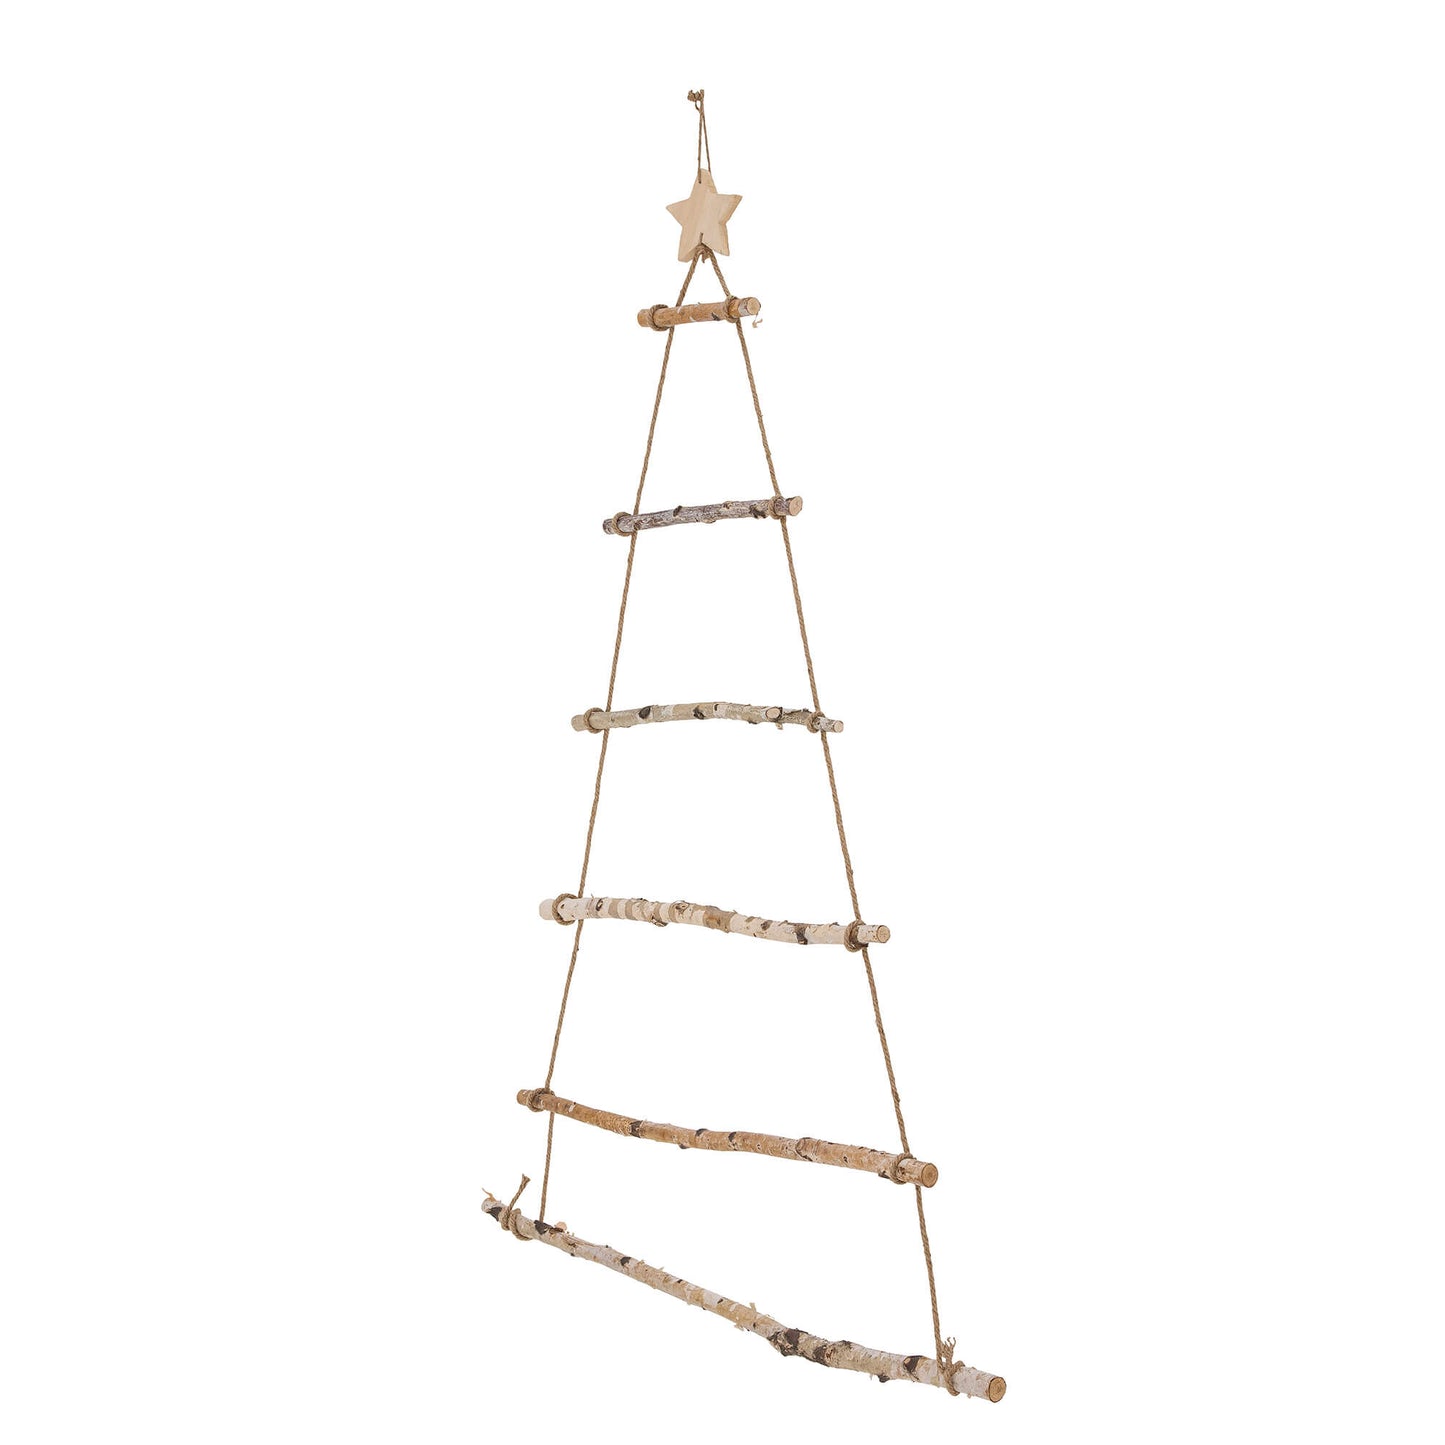 Side View of Majda Deco Tree: A side-angle view of the Majda Deco Tree by Bloomingville, showcasing its natural jute string and birch branches.